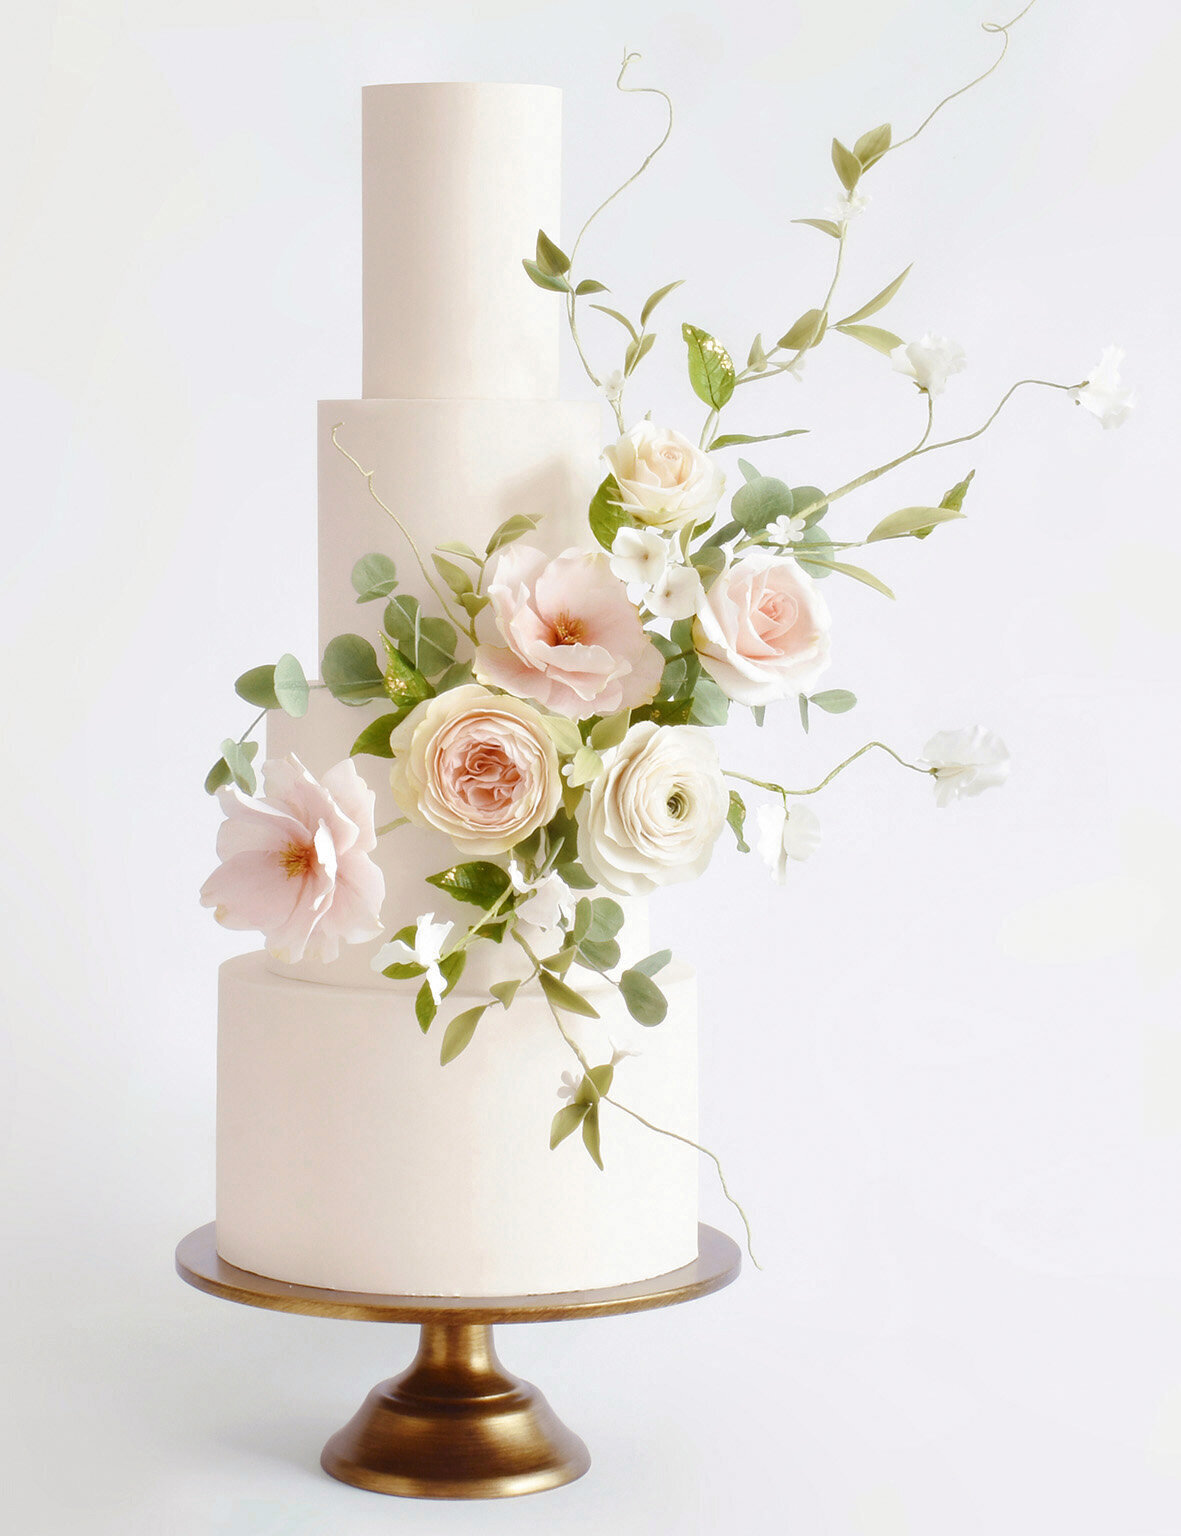 Modern Round Wedding Cake with Candles